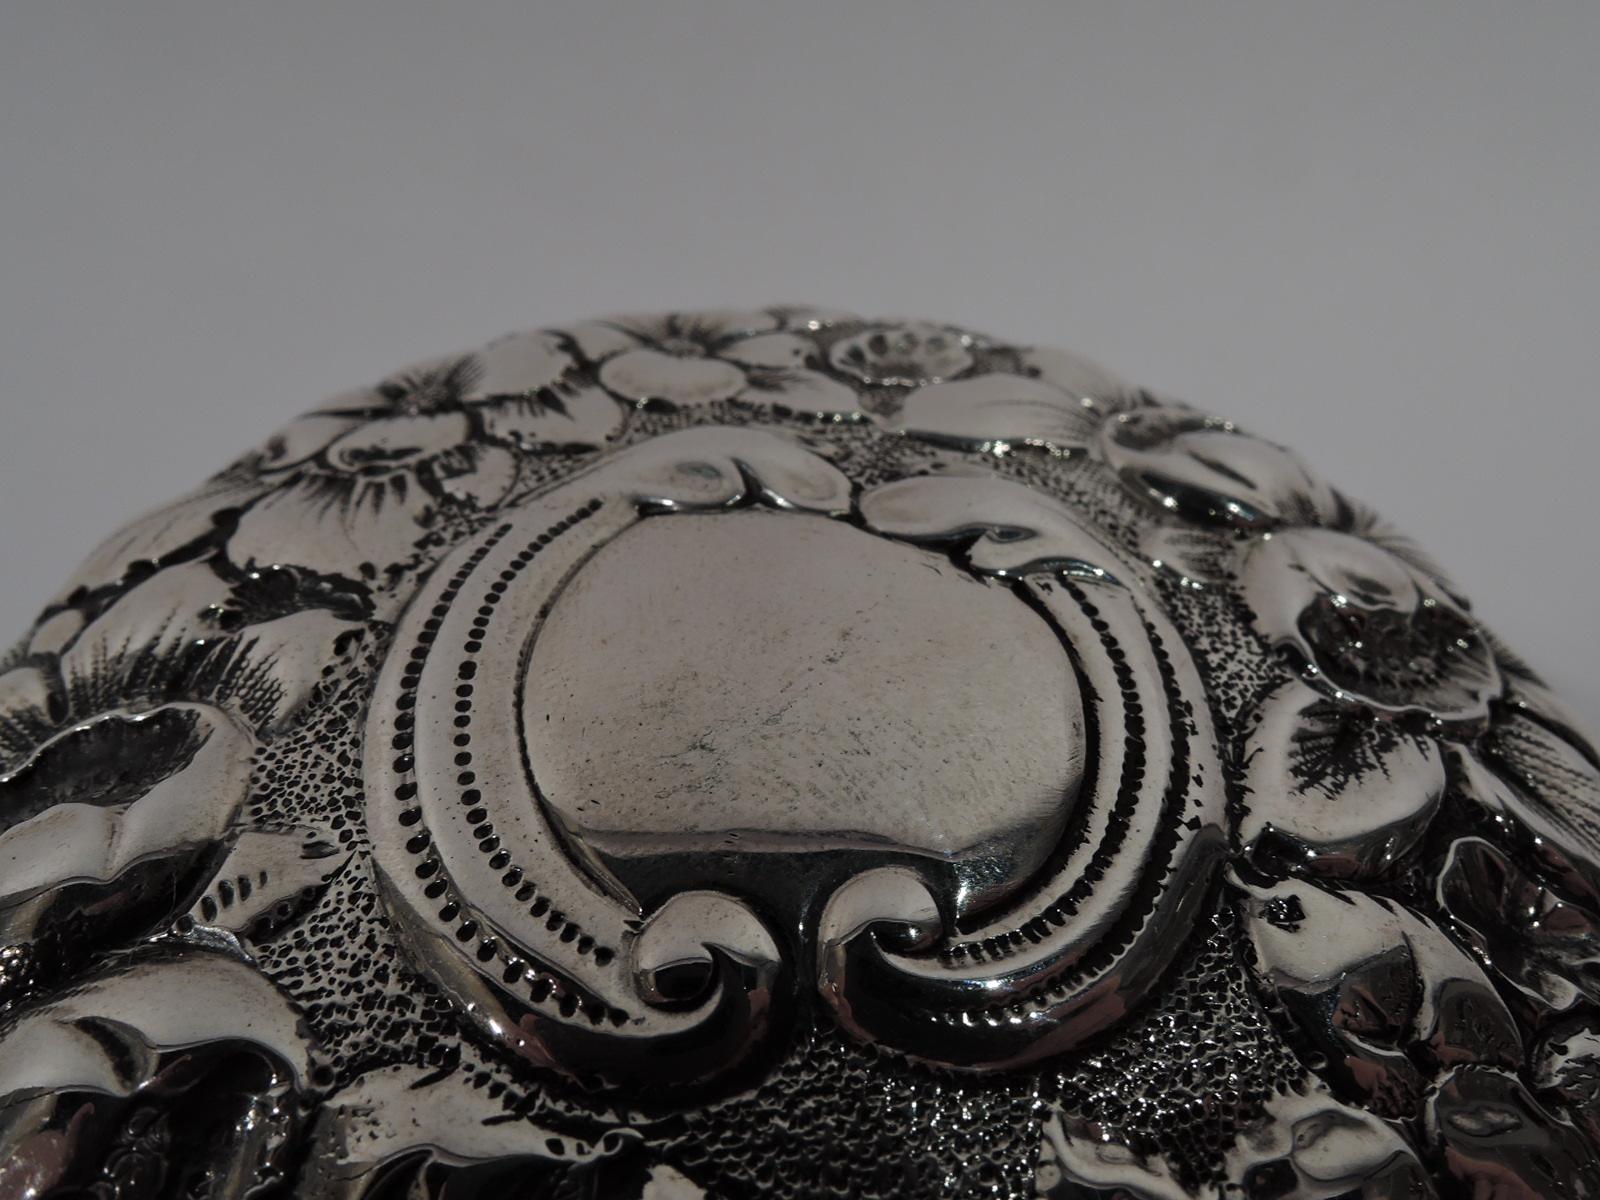 North American Antique Baltimore-Style Repousse Sterling Silver Trinket Box